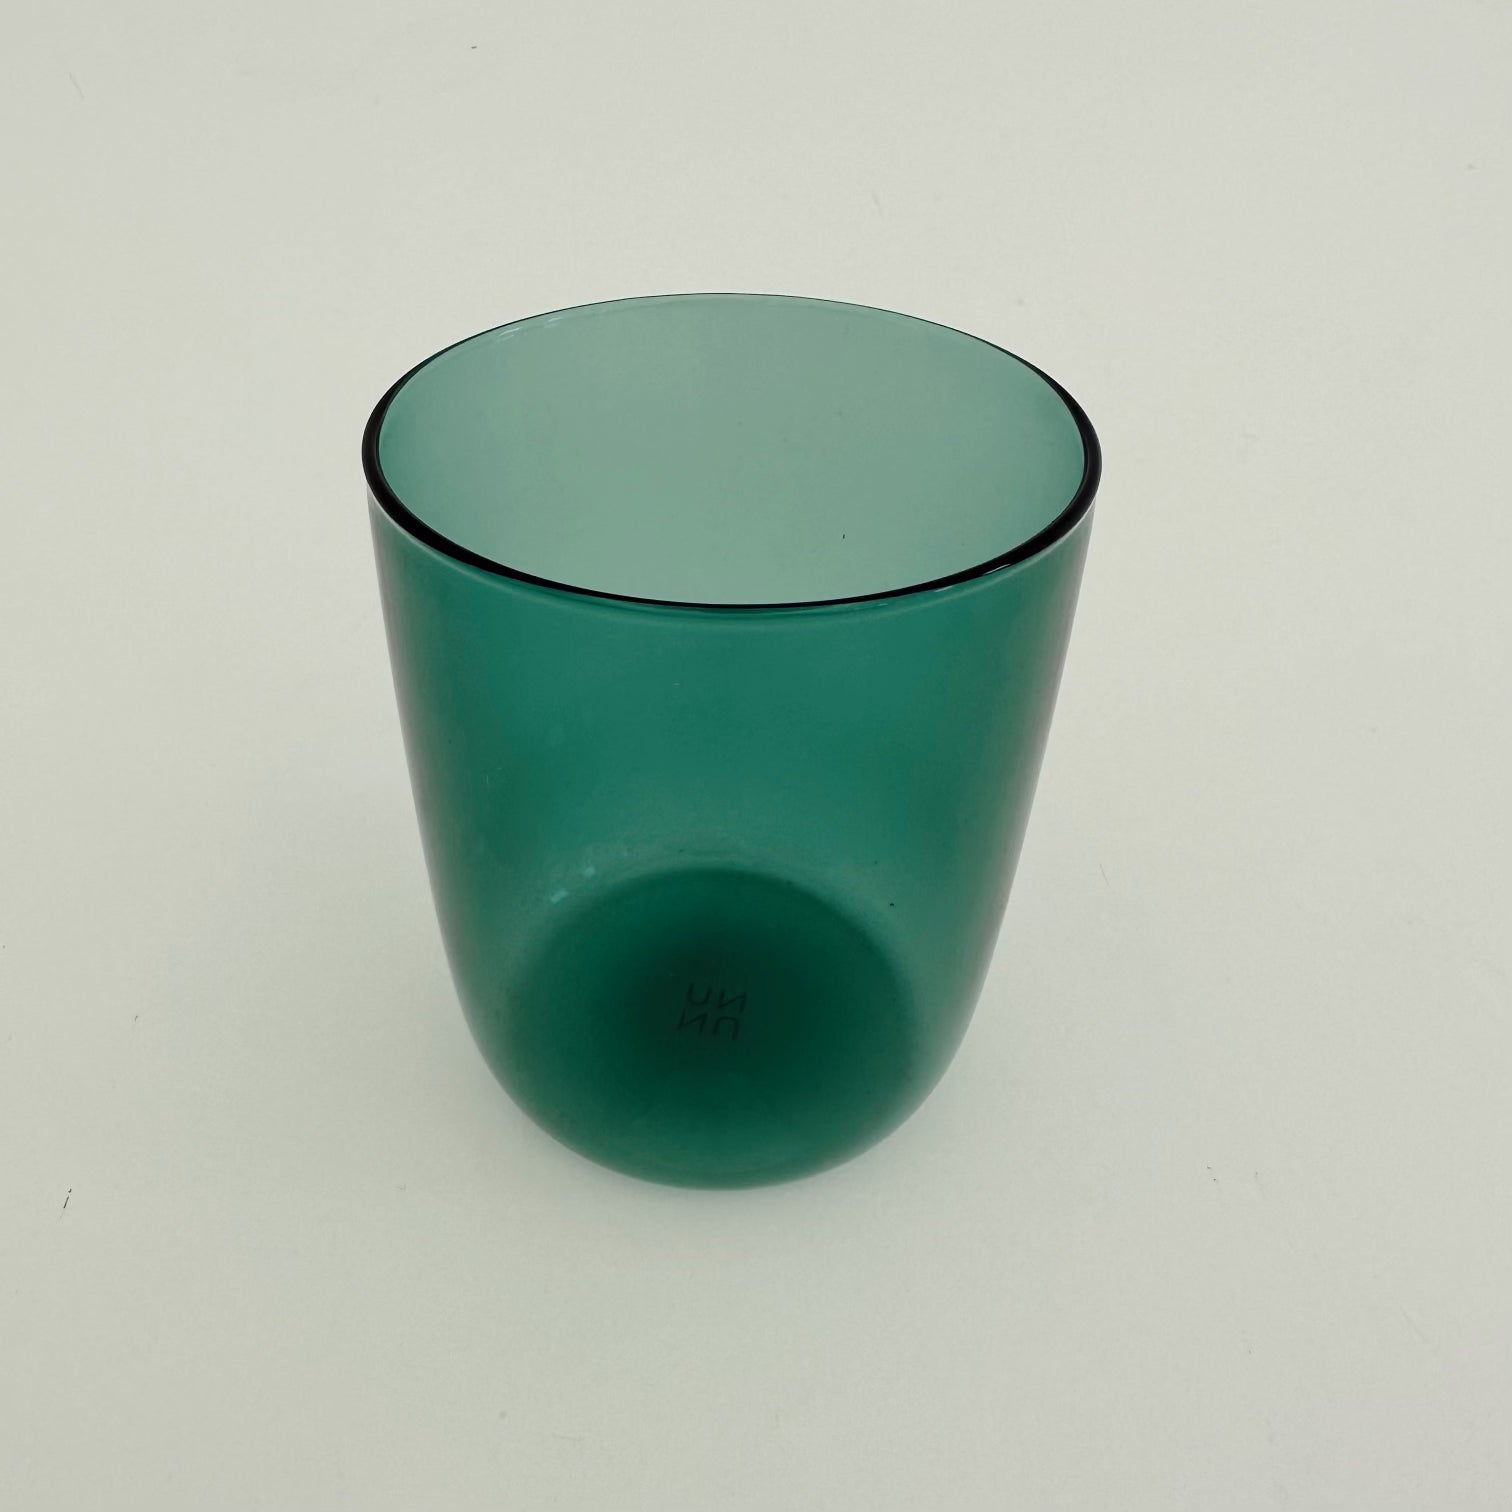 HOUSE OF NUNU BELLY CUP: TEAL